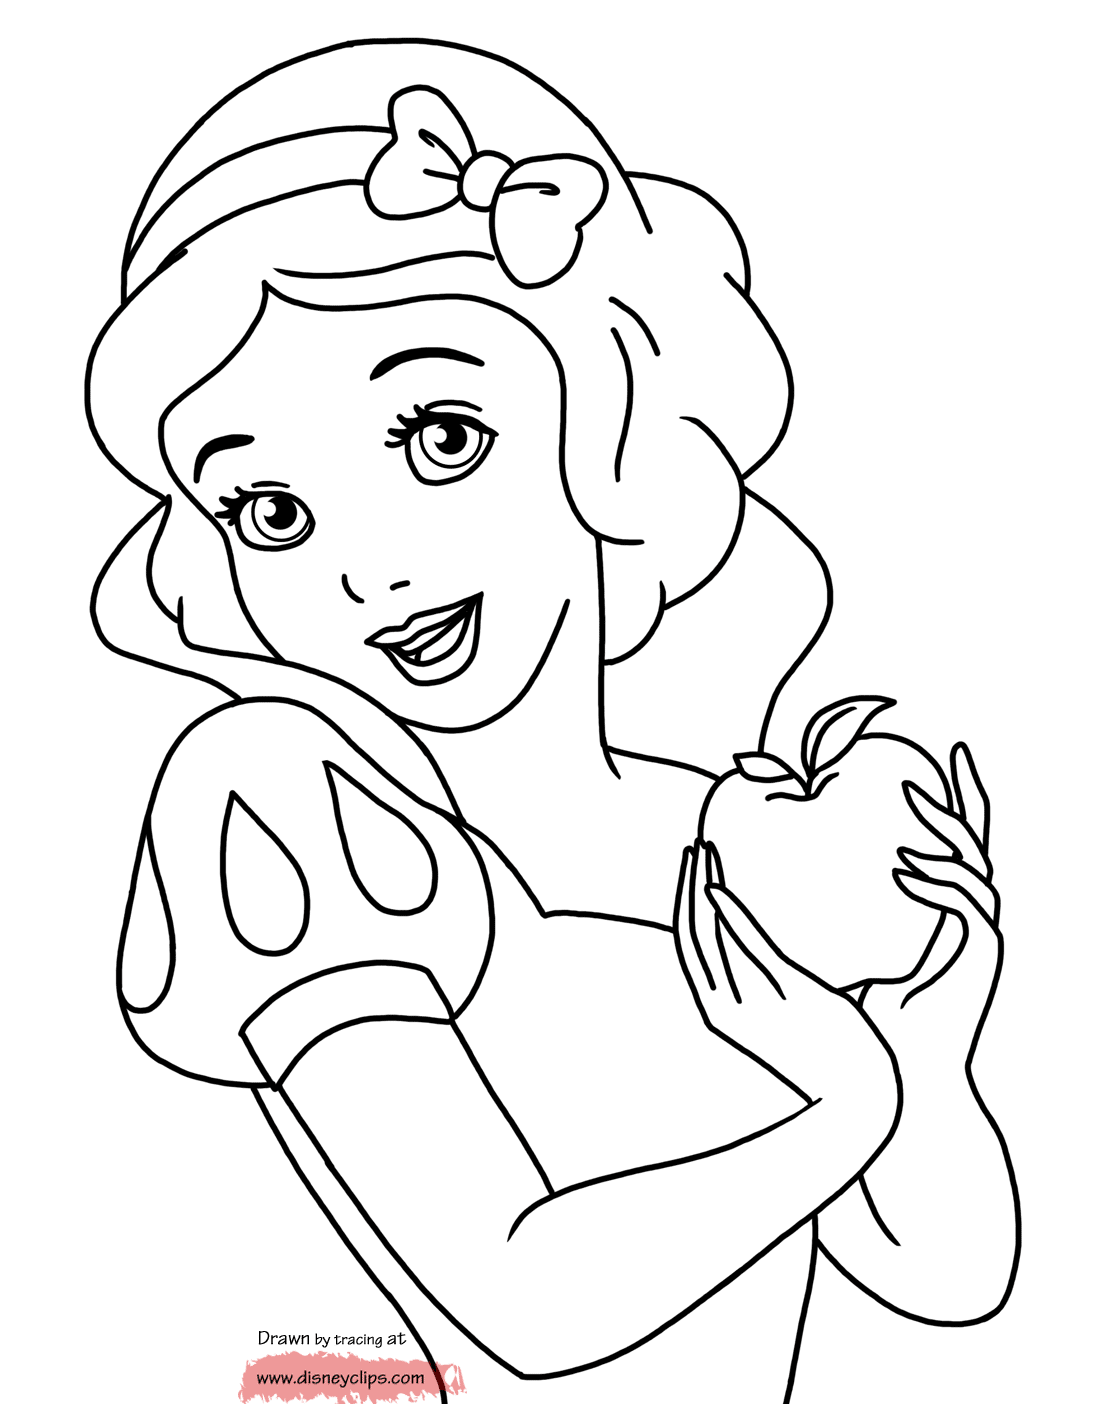 Snow White and the Seven Dwarfs Coloring Pages ...